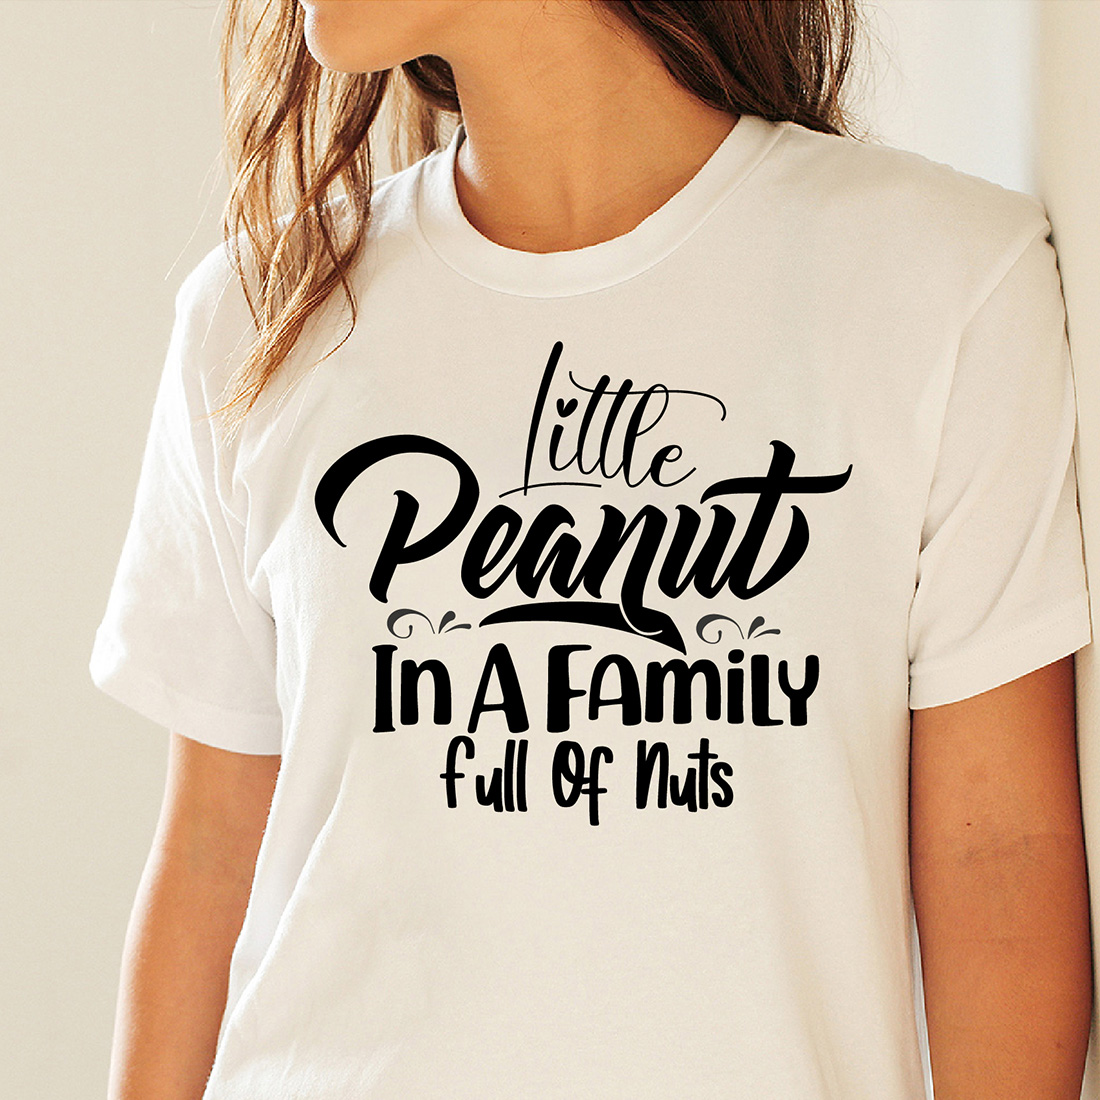 Picture of a white T-shirt with irresistible black slogan Little Peanut In A Family Full Of Nuts.